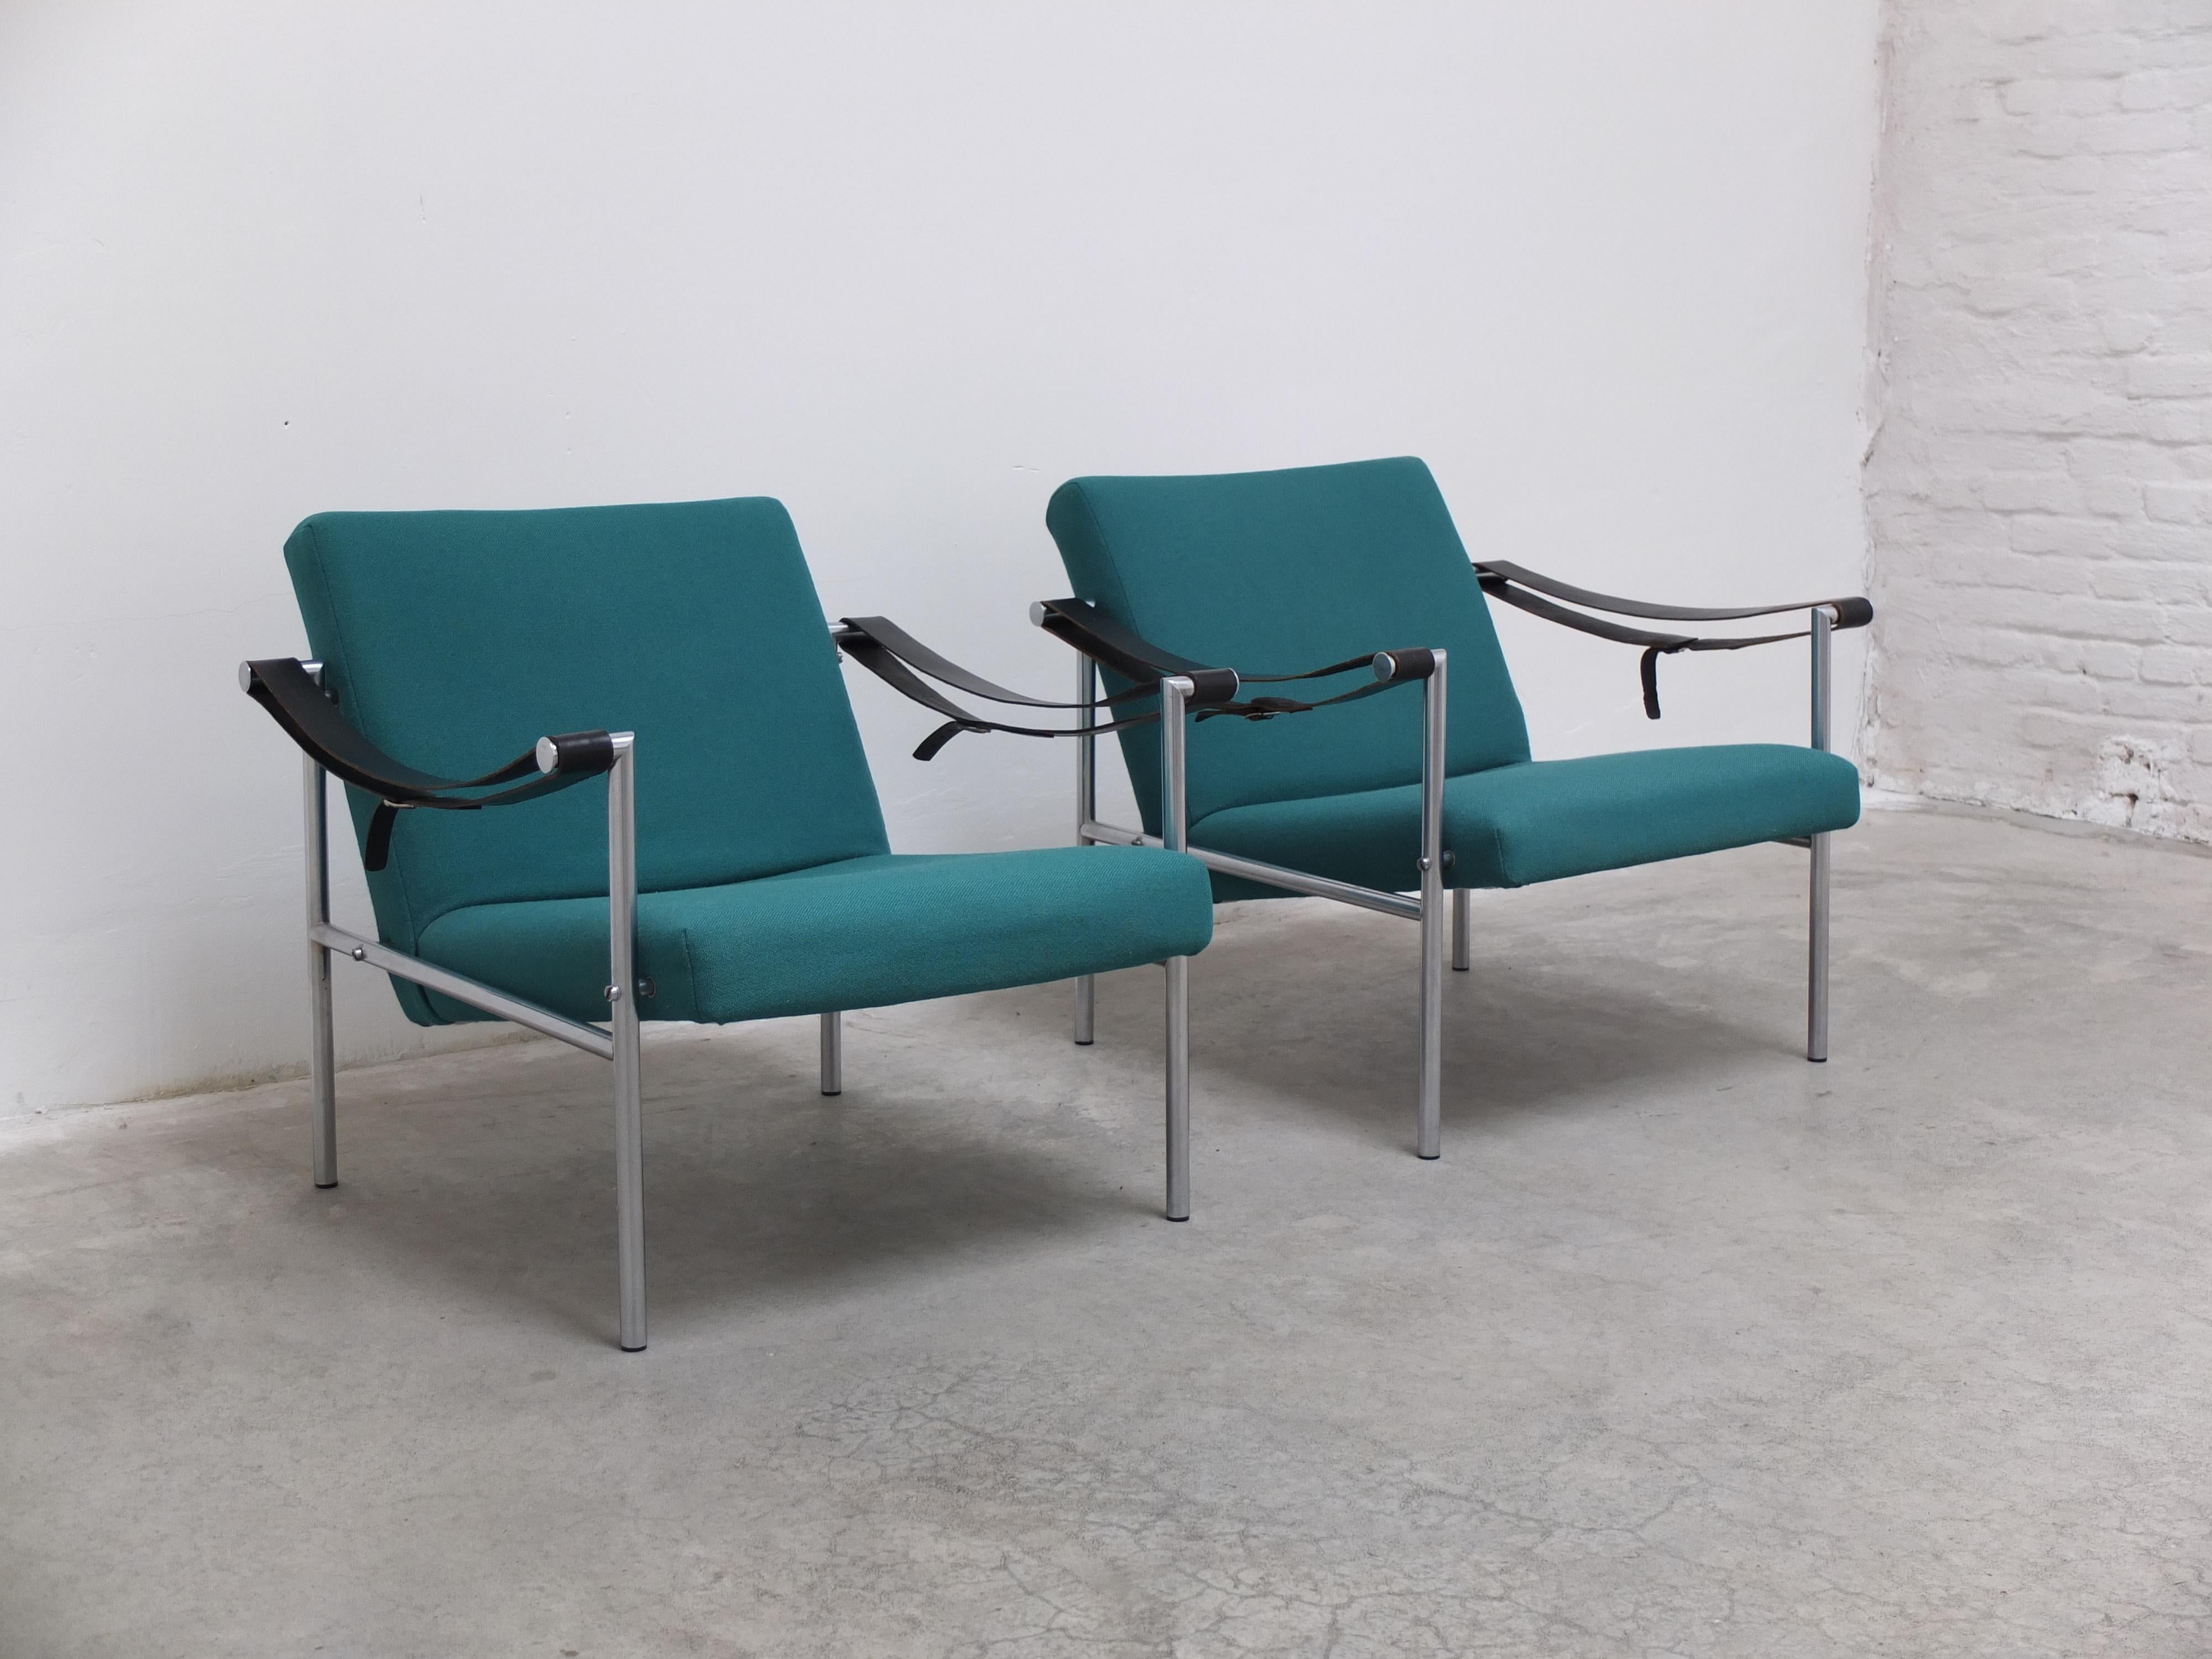 Dutch Pair of 'SZ08' Lounge Chairs by Martin Visser for 't Spectrum, 1960 For Sale